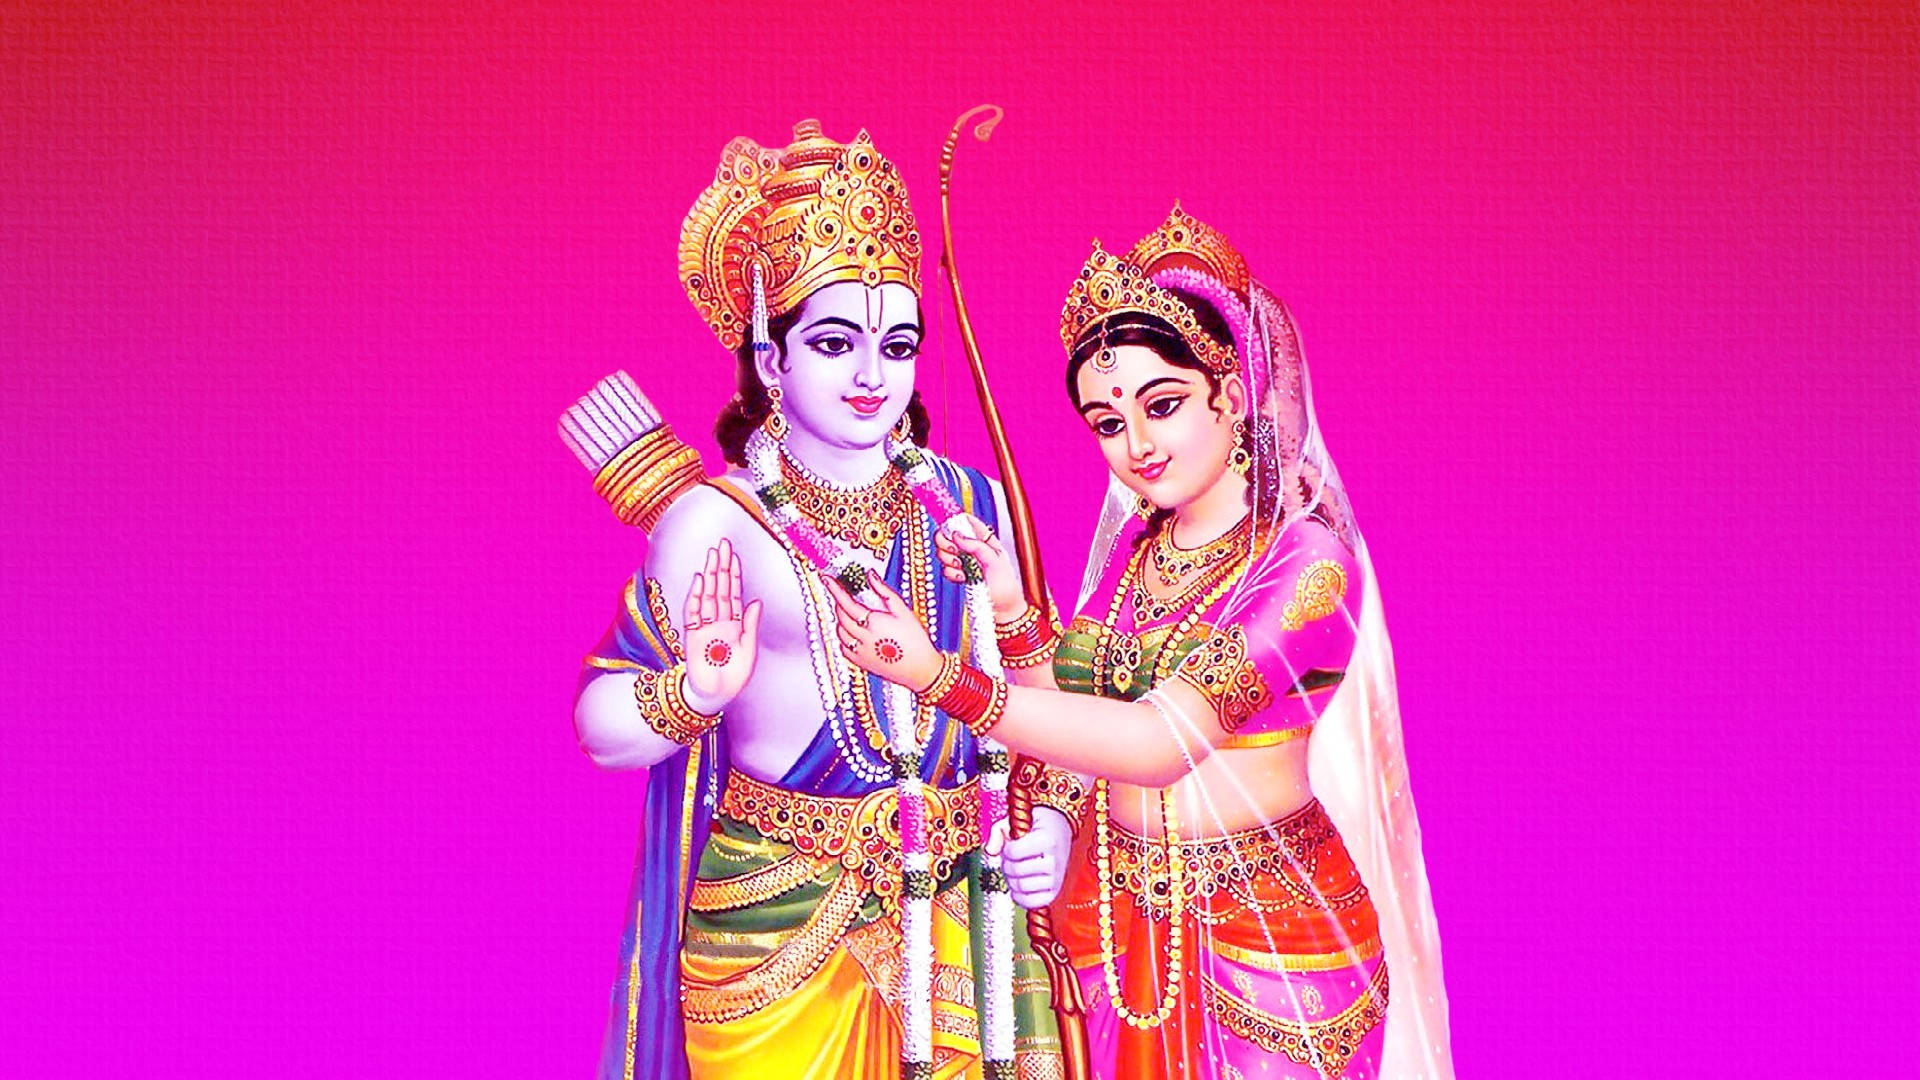 Majestic Lord Rama With Bow And Arrow